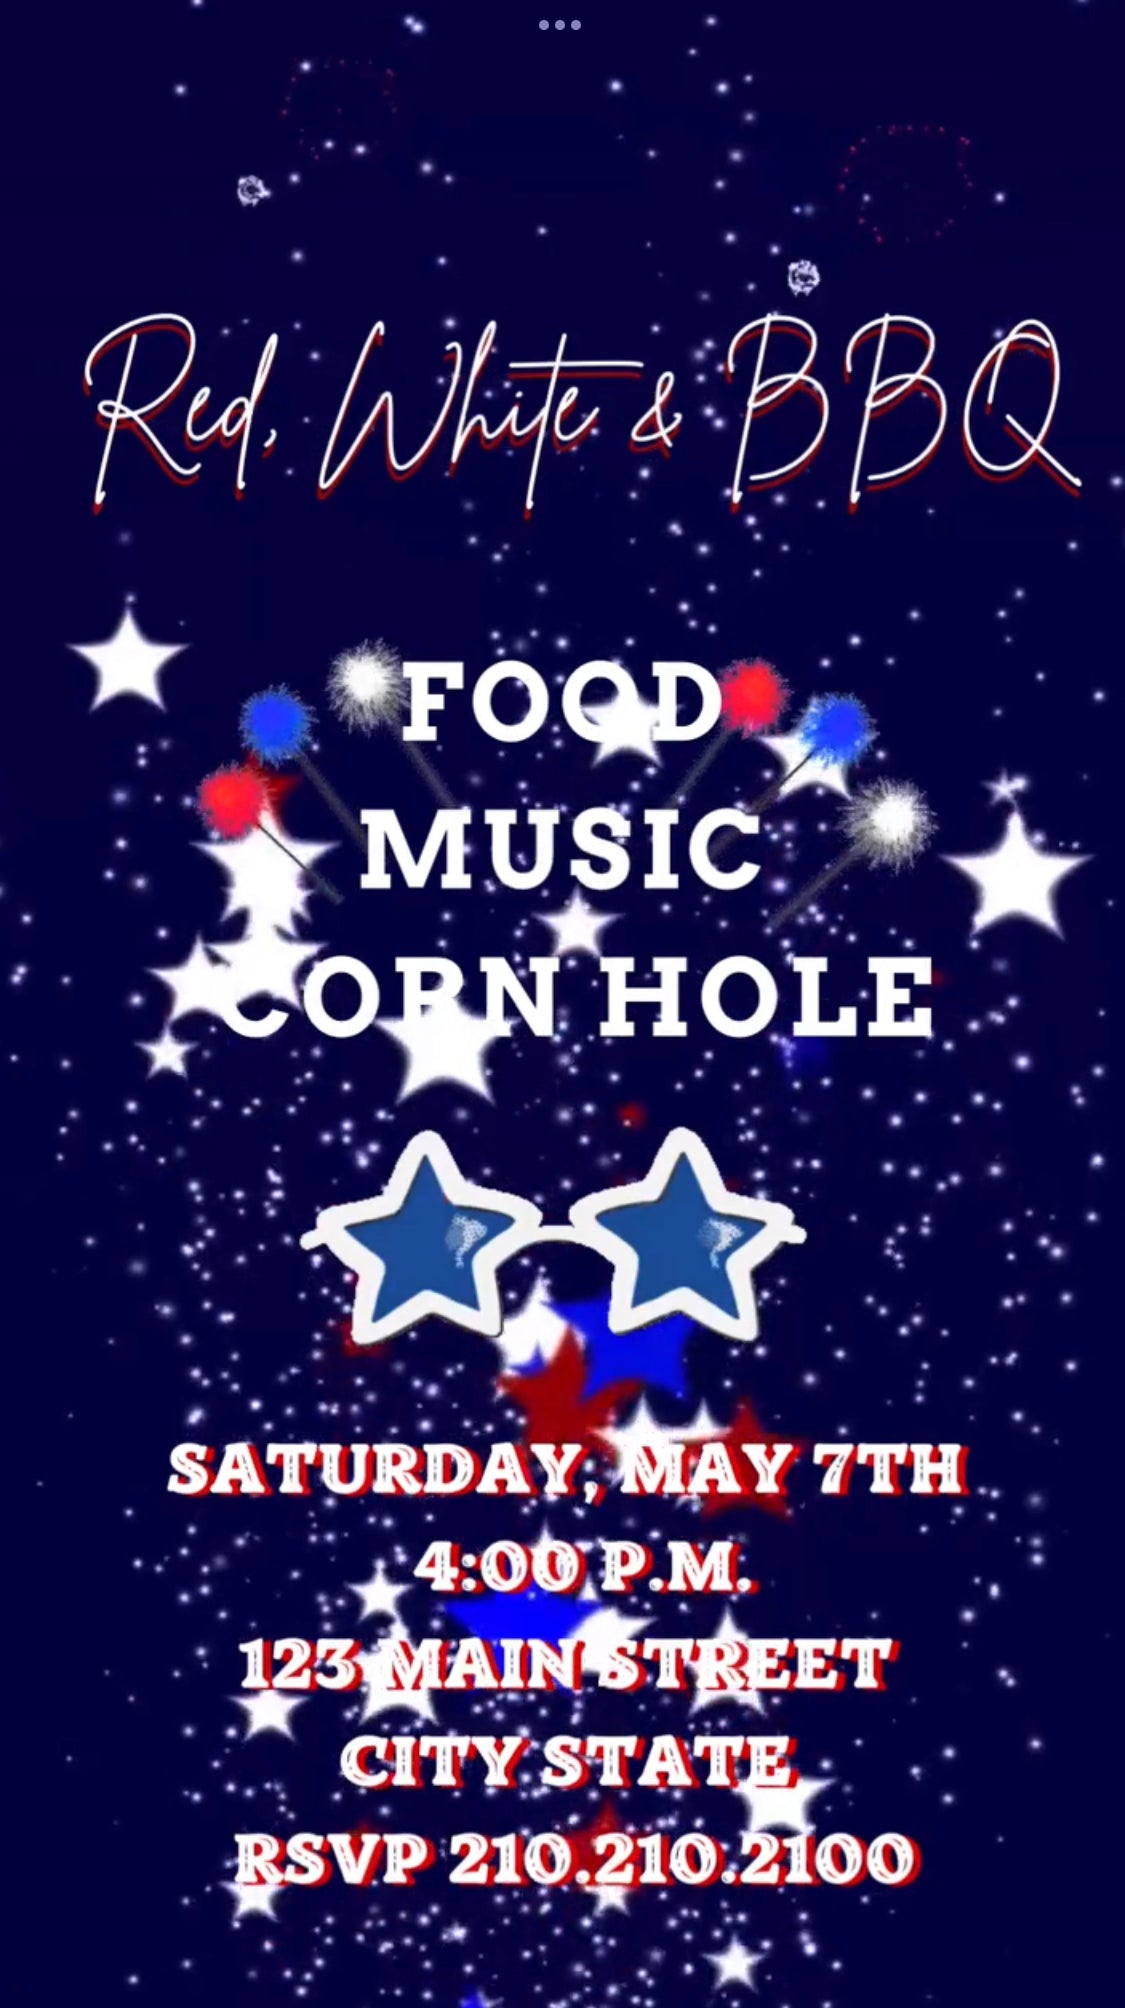 July 4th Video Invitation, Independence Day Party, Red, White, and BBQ Invitation